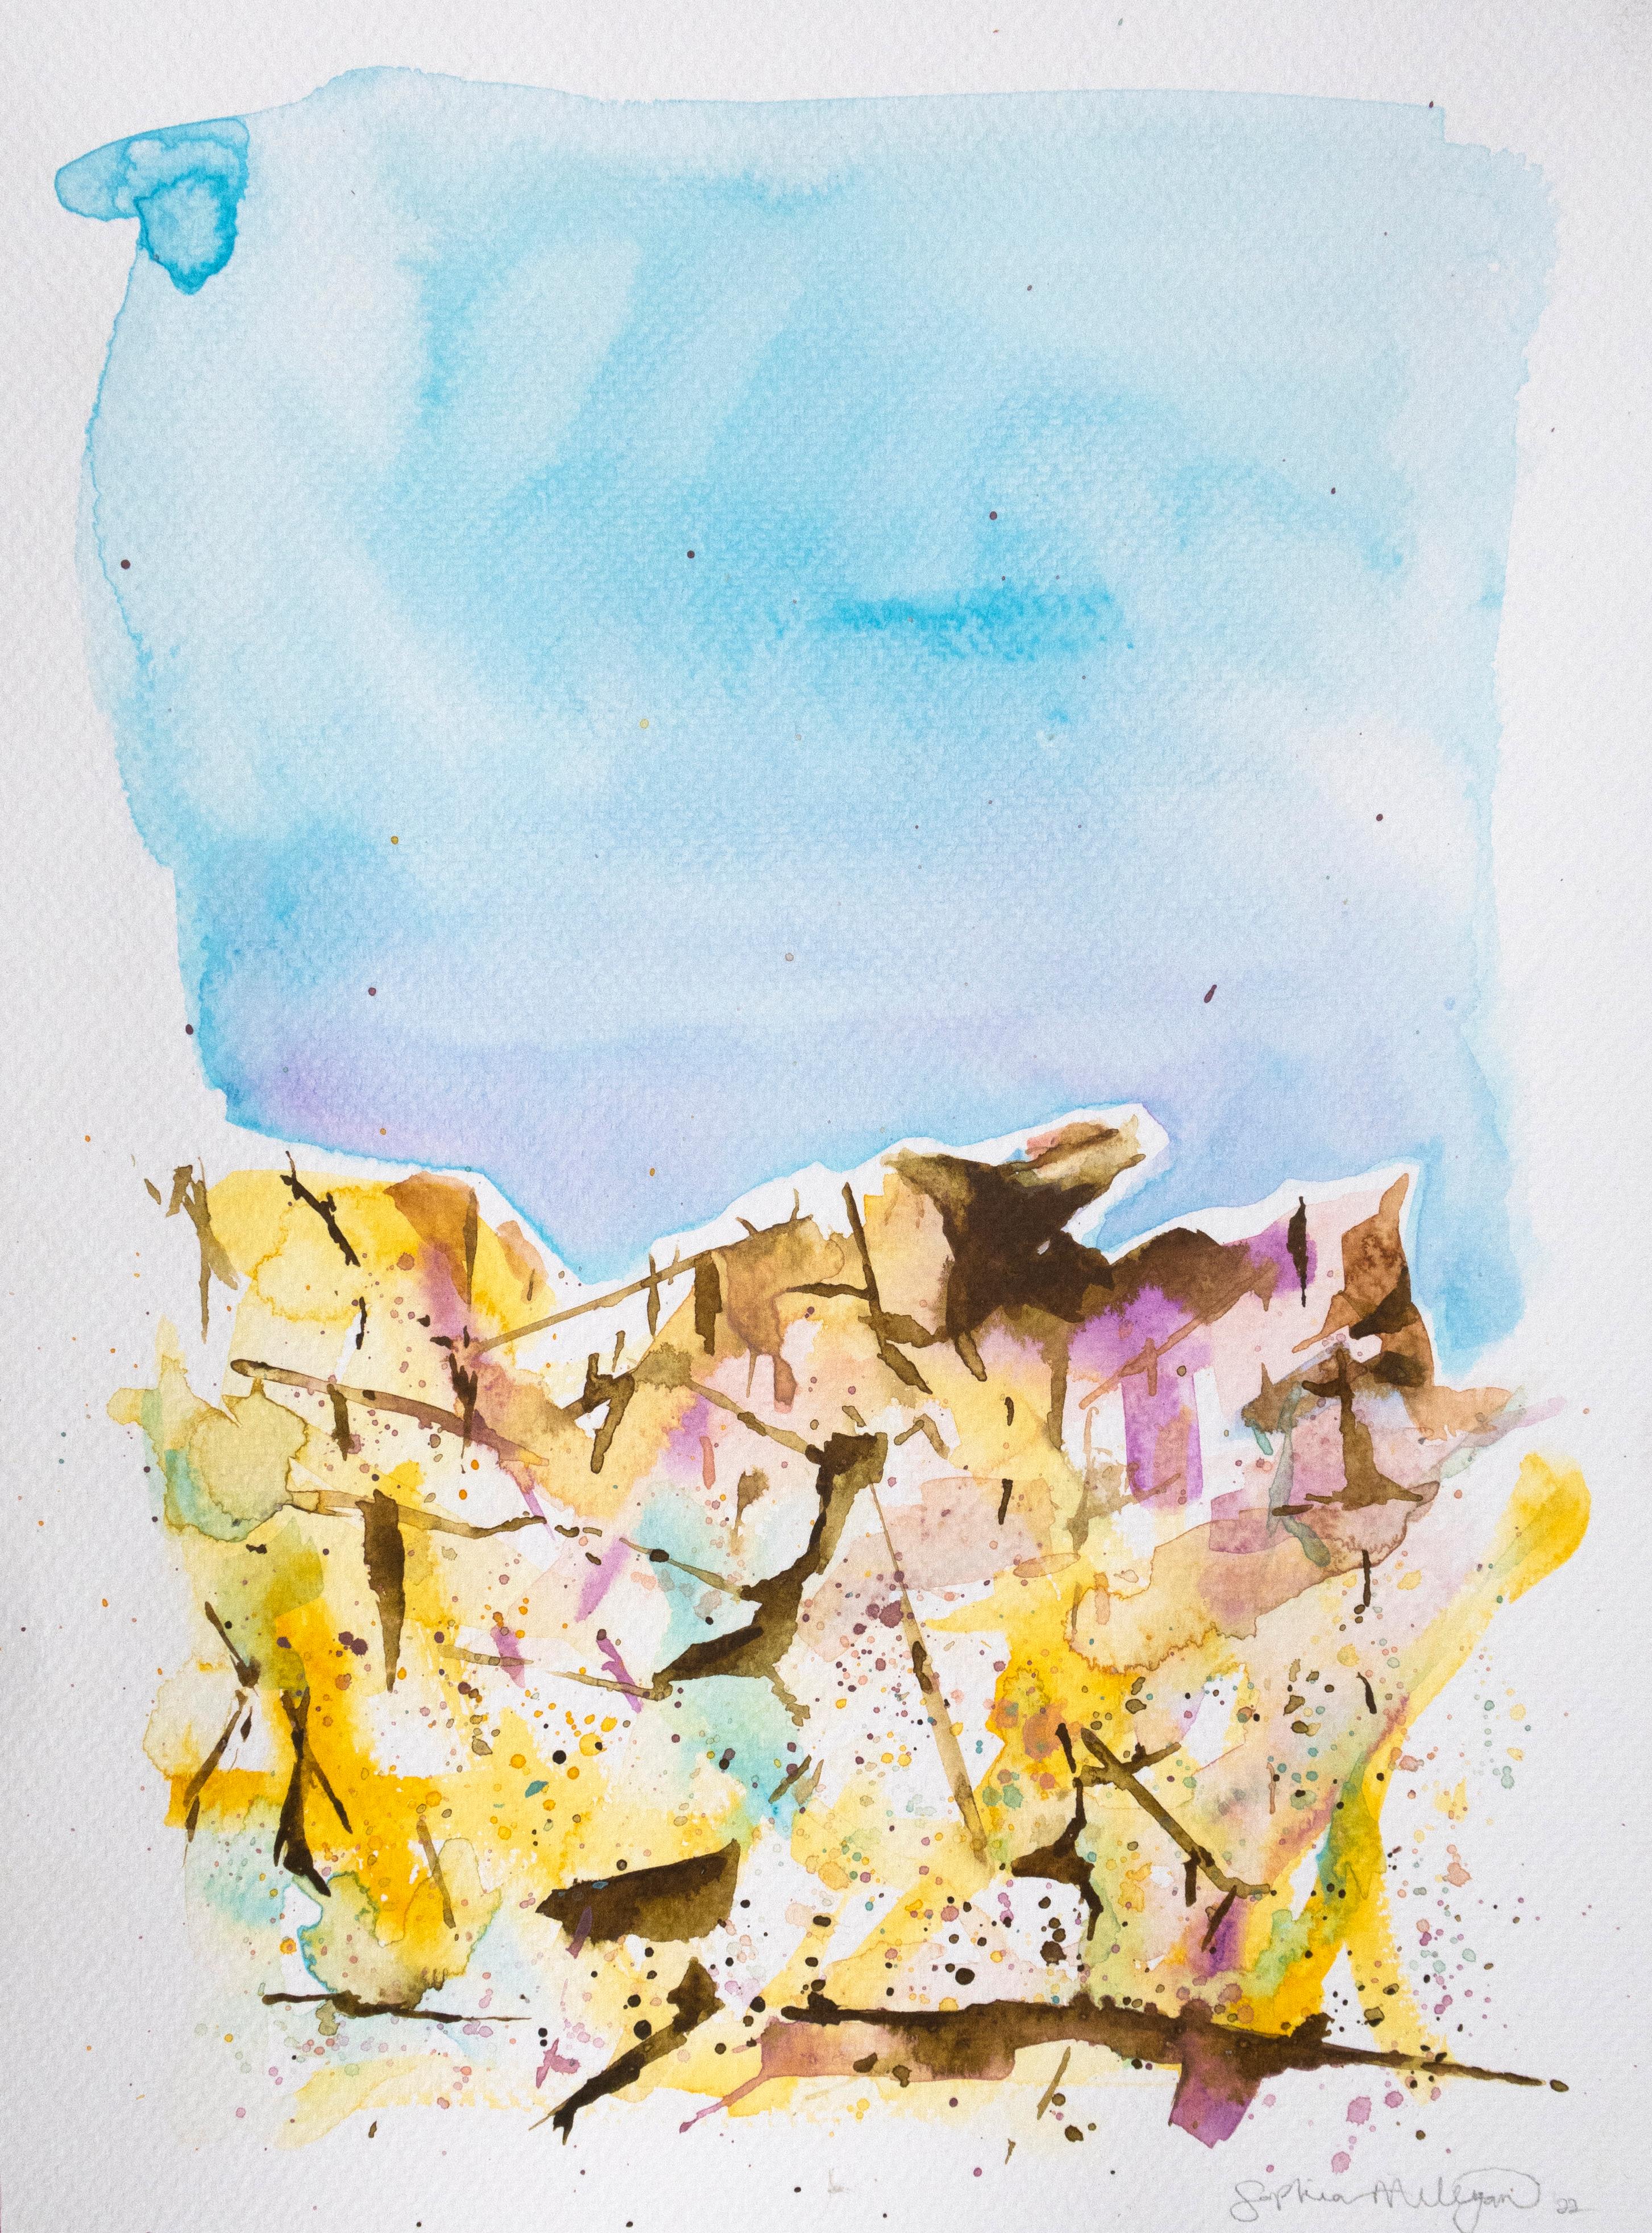 Sophia Milligan Landscape Art - 'Prye' Contemporary landscape blue sky, yellow stone, earth and air